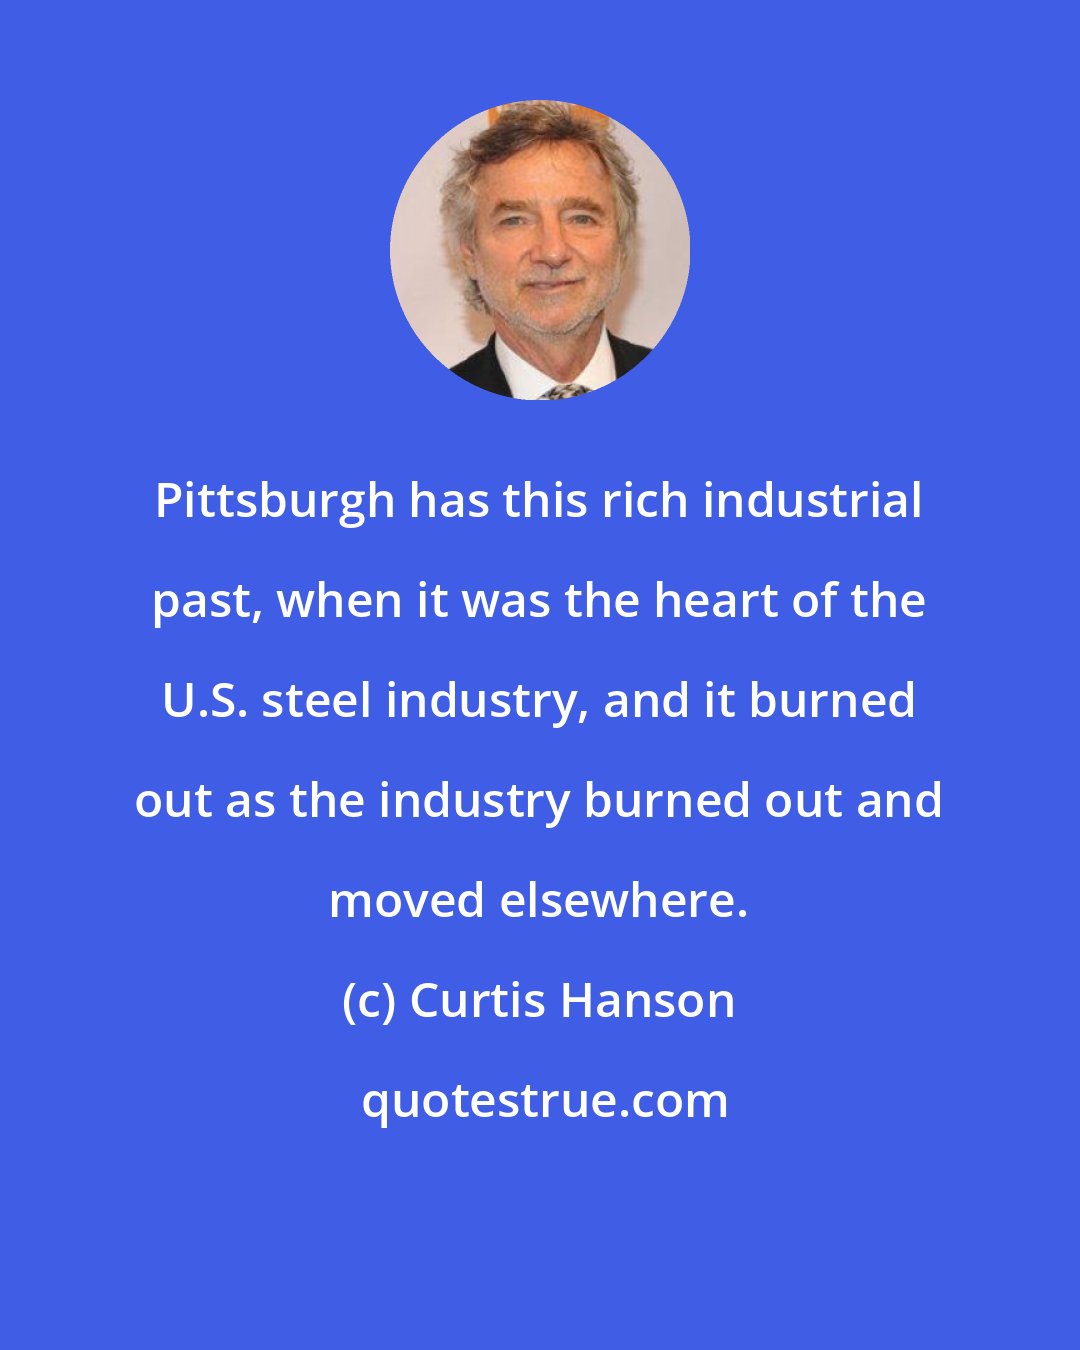 Curtis Hanson: Pittsburgh has this rich industrial past, when it was the heart of the U.S. steel industry, and it burned out as the industry burned out and moved elsewhere.